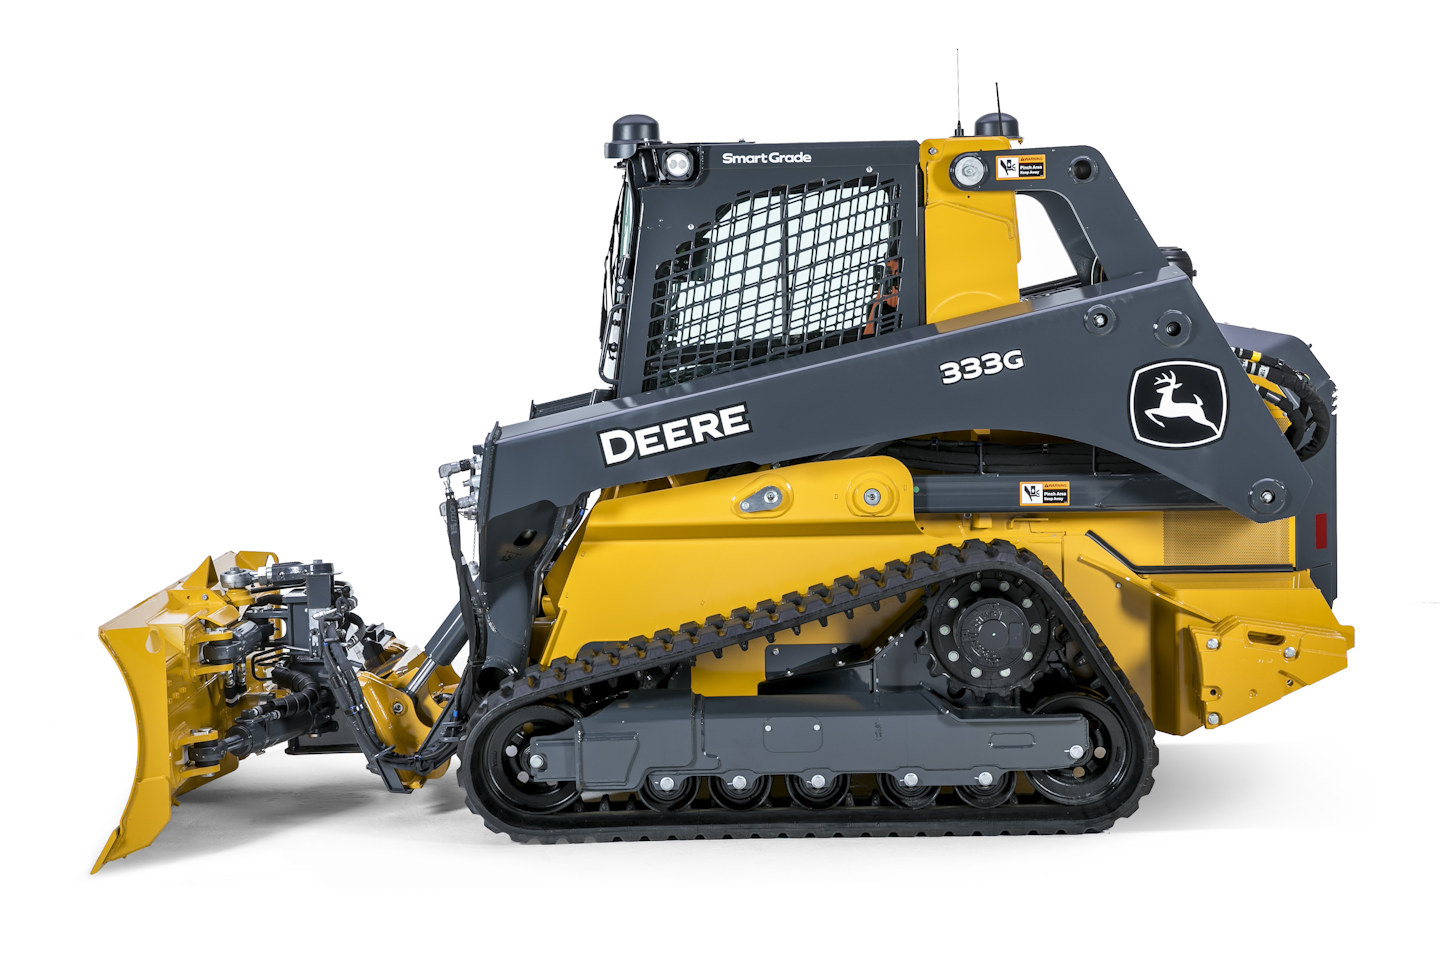 Deere intros 333G compact track loader with integrated grade control